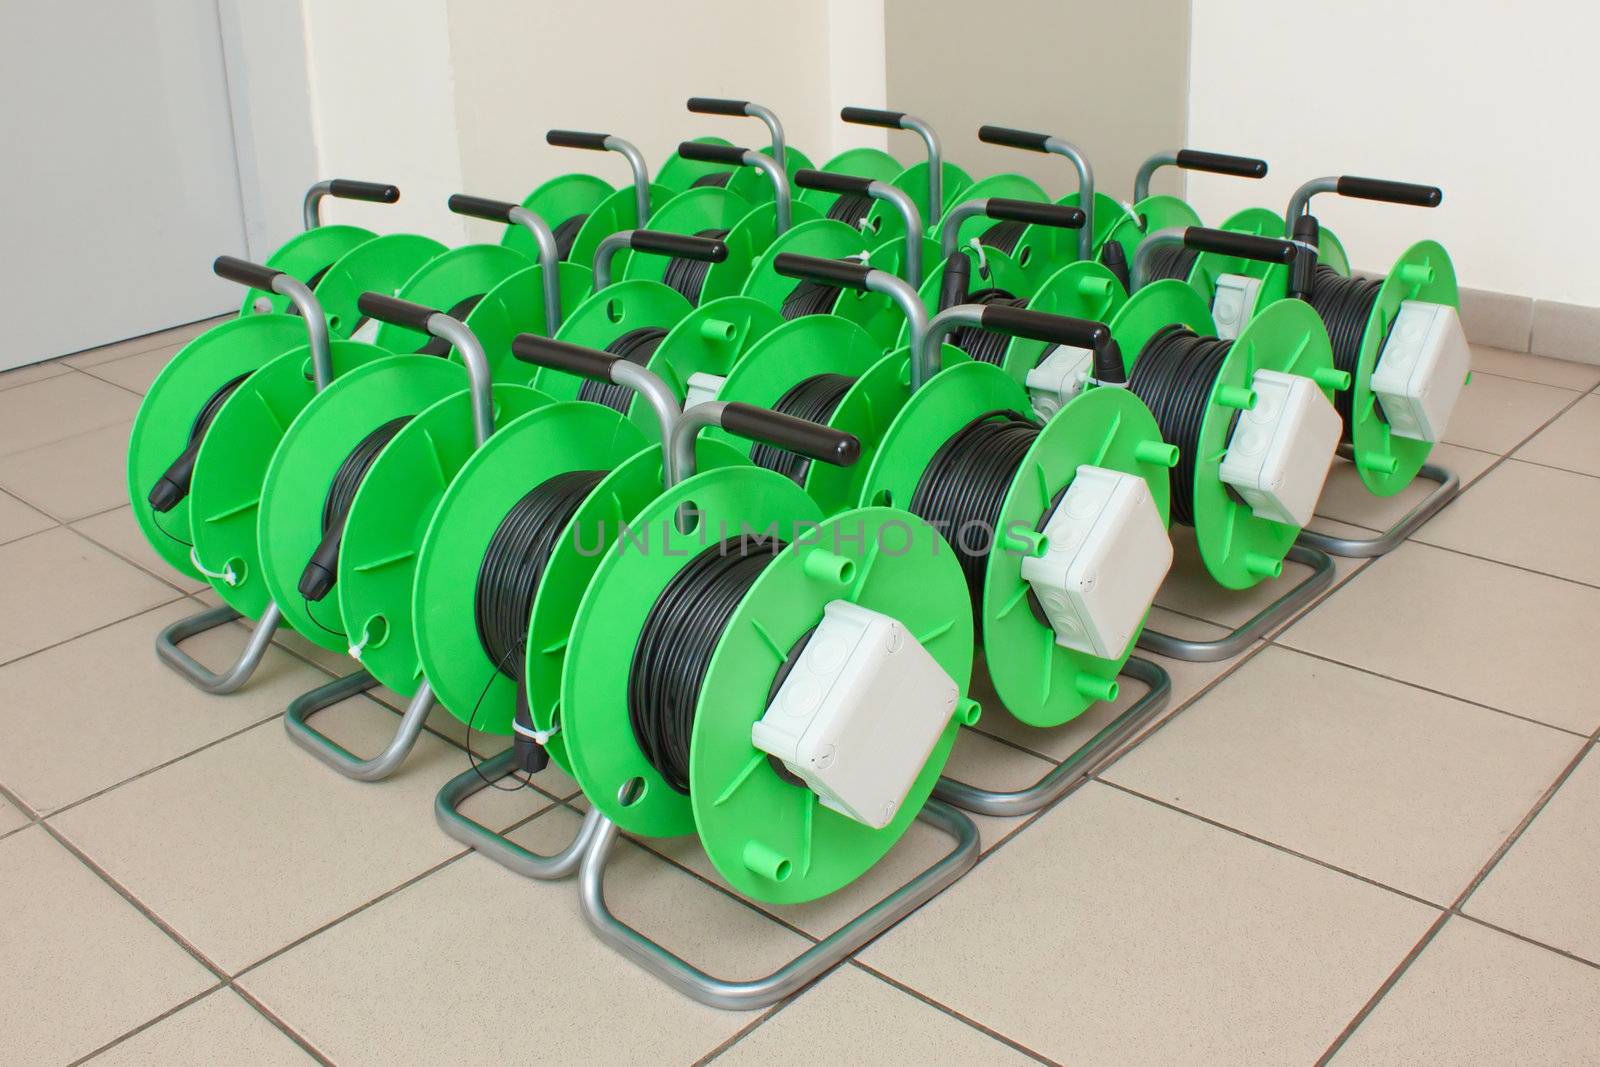 Group of cable reels for new fiber optic installation by artush